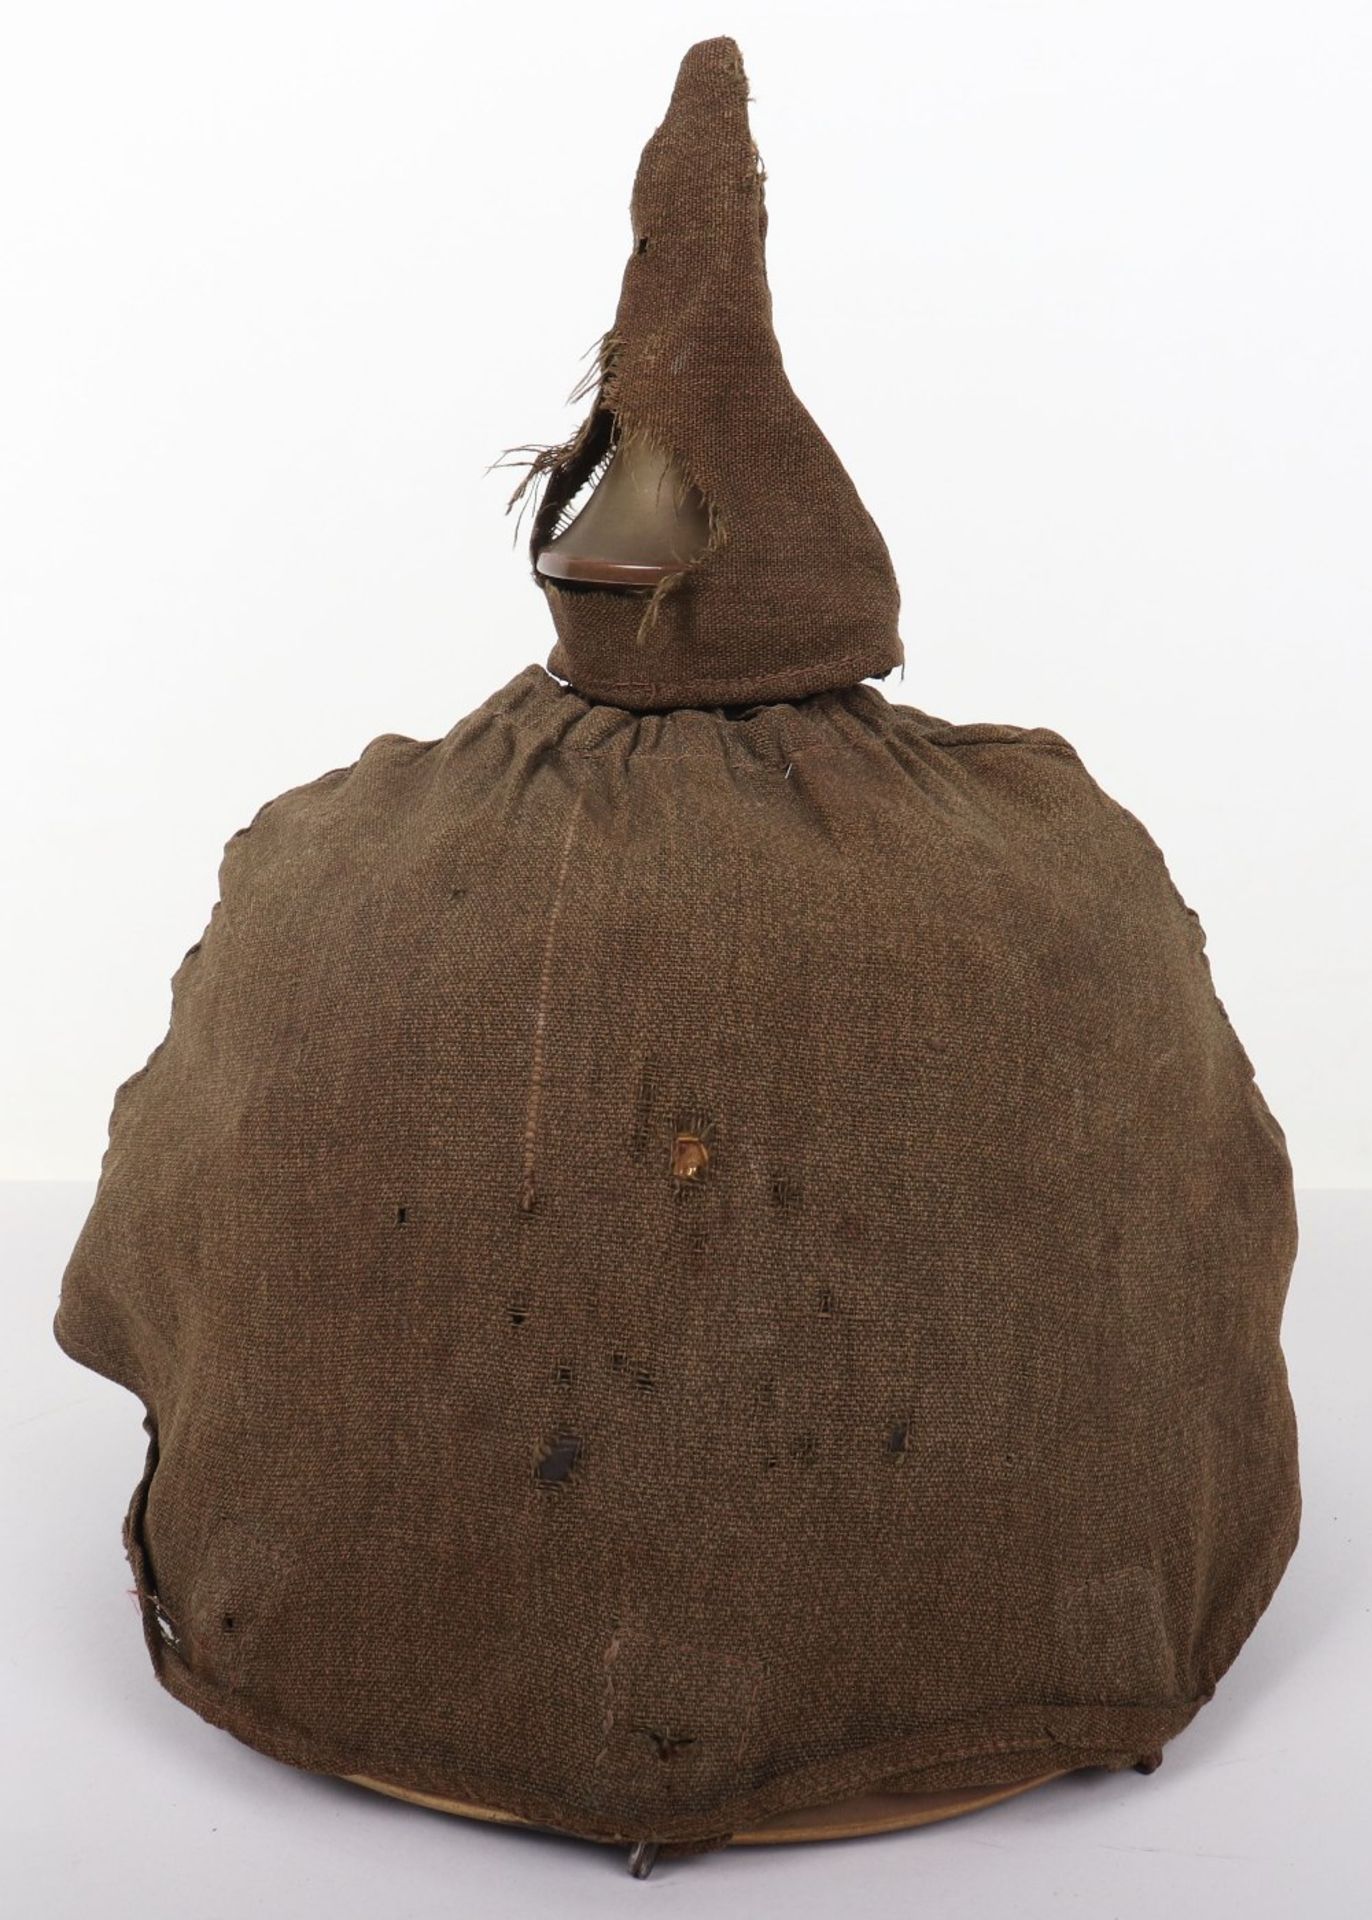 German Infantry Regiment Nr 95 (6.Thuringisches) Other Ranks Pickelhaube with Field Cover - Image 28 of 32